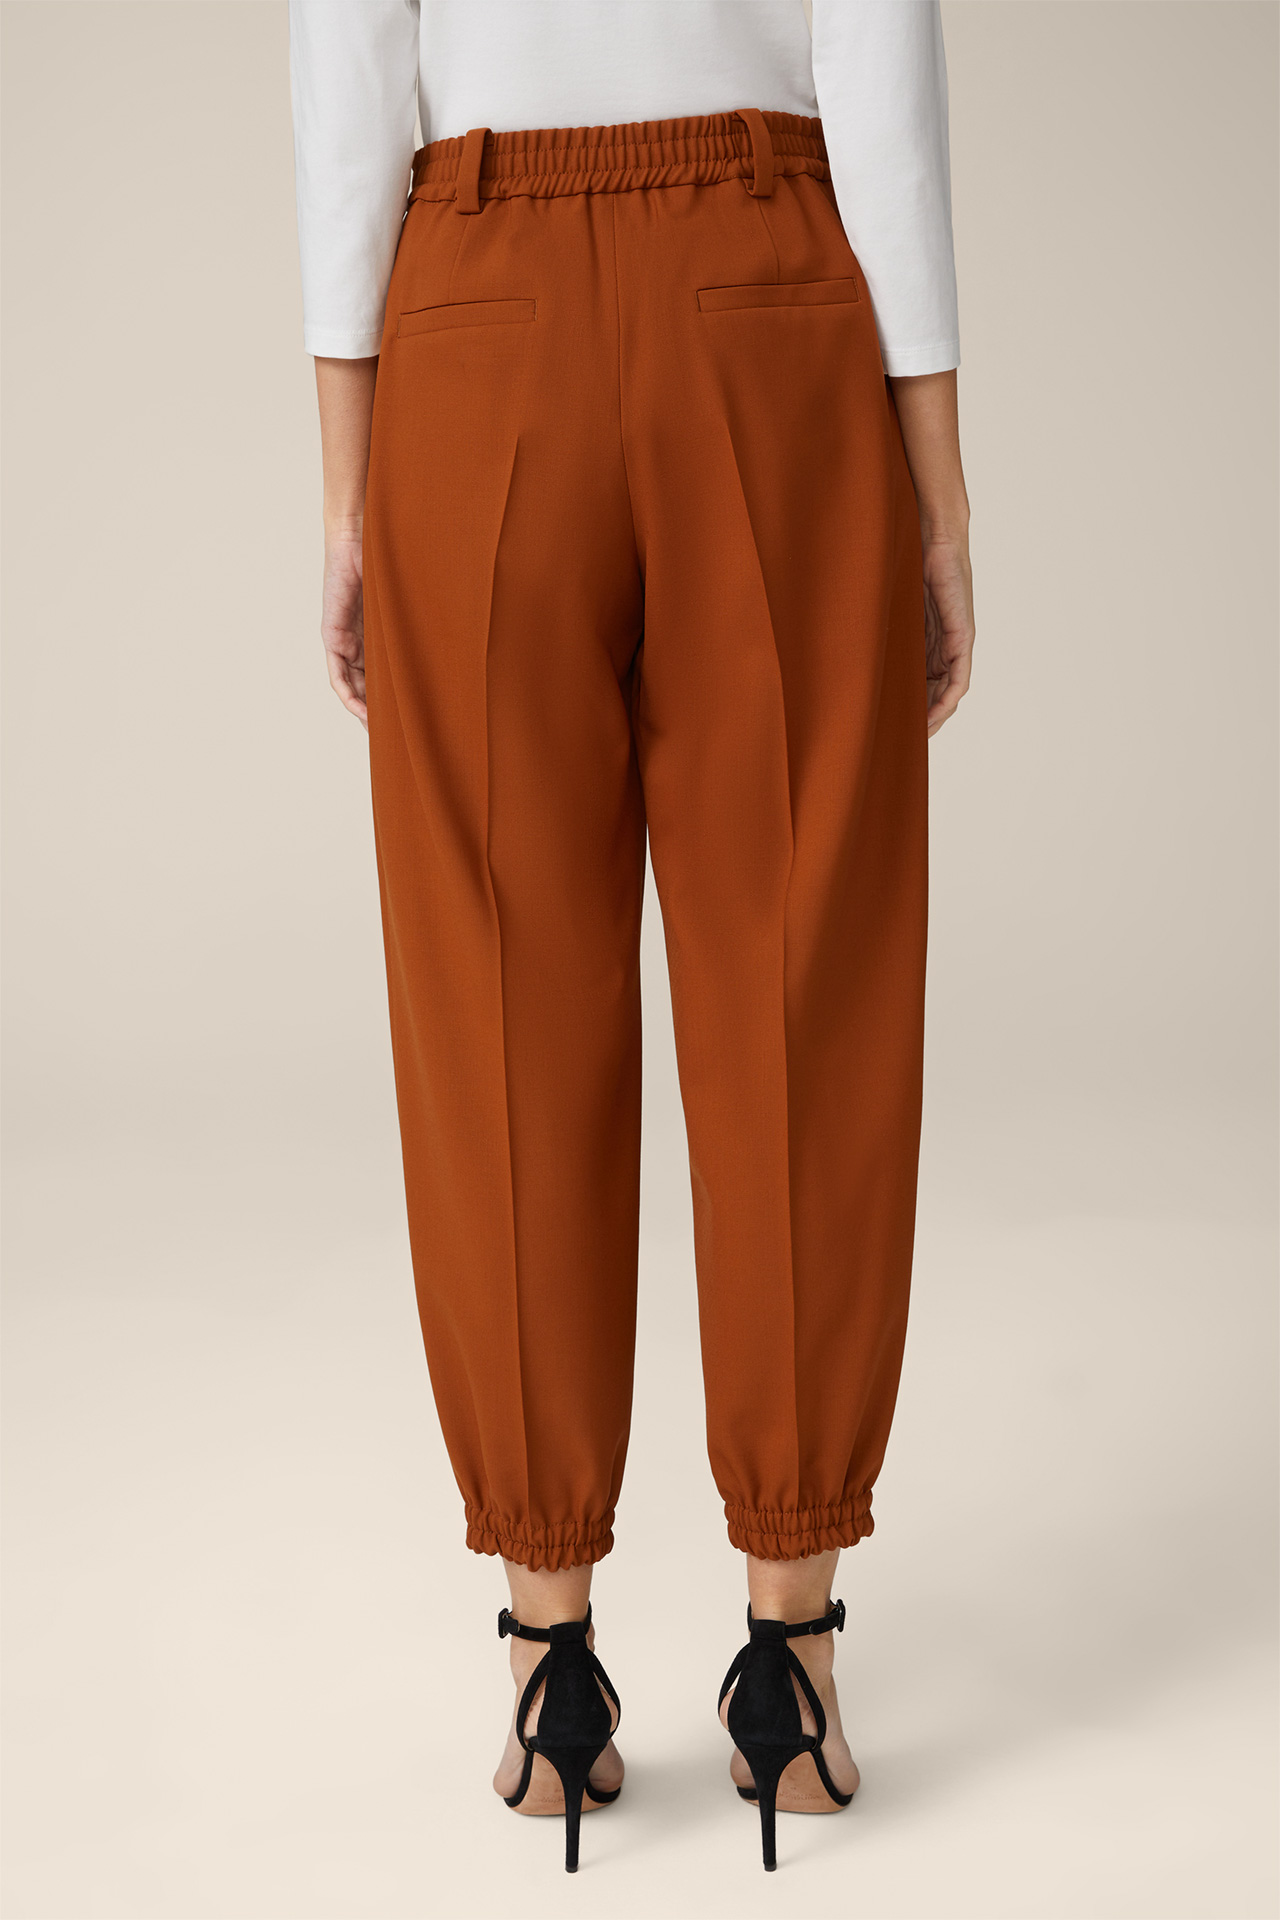 Wool Stretch Copper Jogger-Style Trousers in Copper